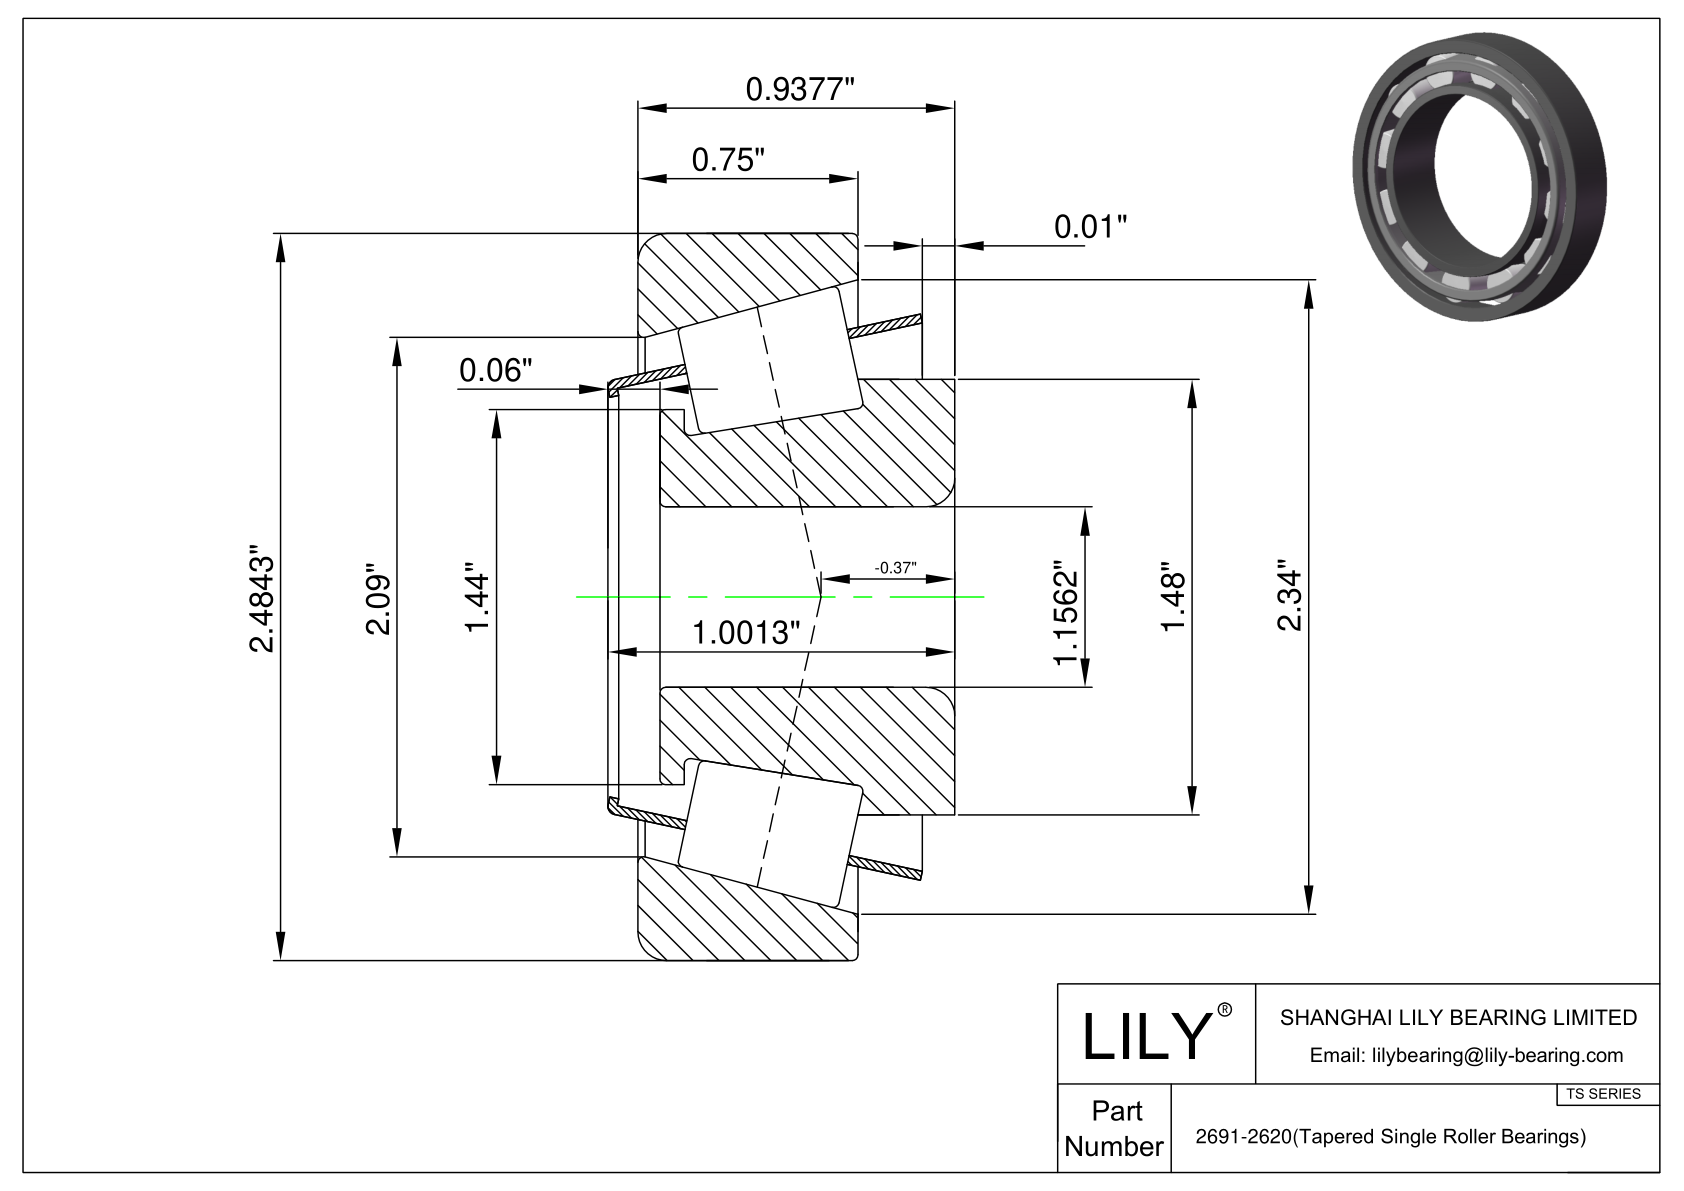 2691-2620 TS (Tapered Single Roller Bearings) (Imperial) cad drawing